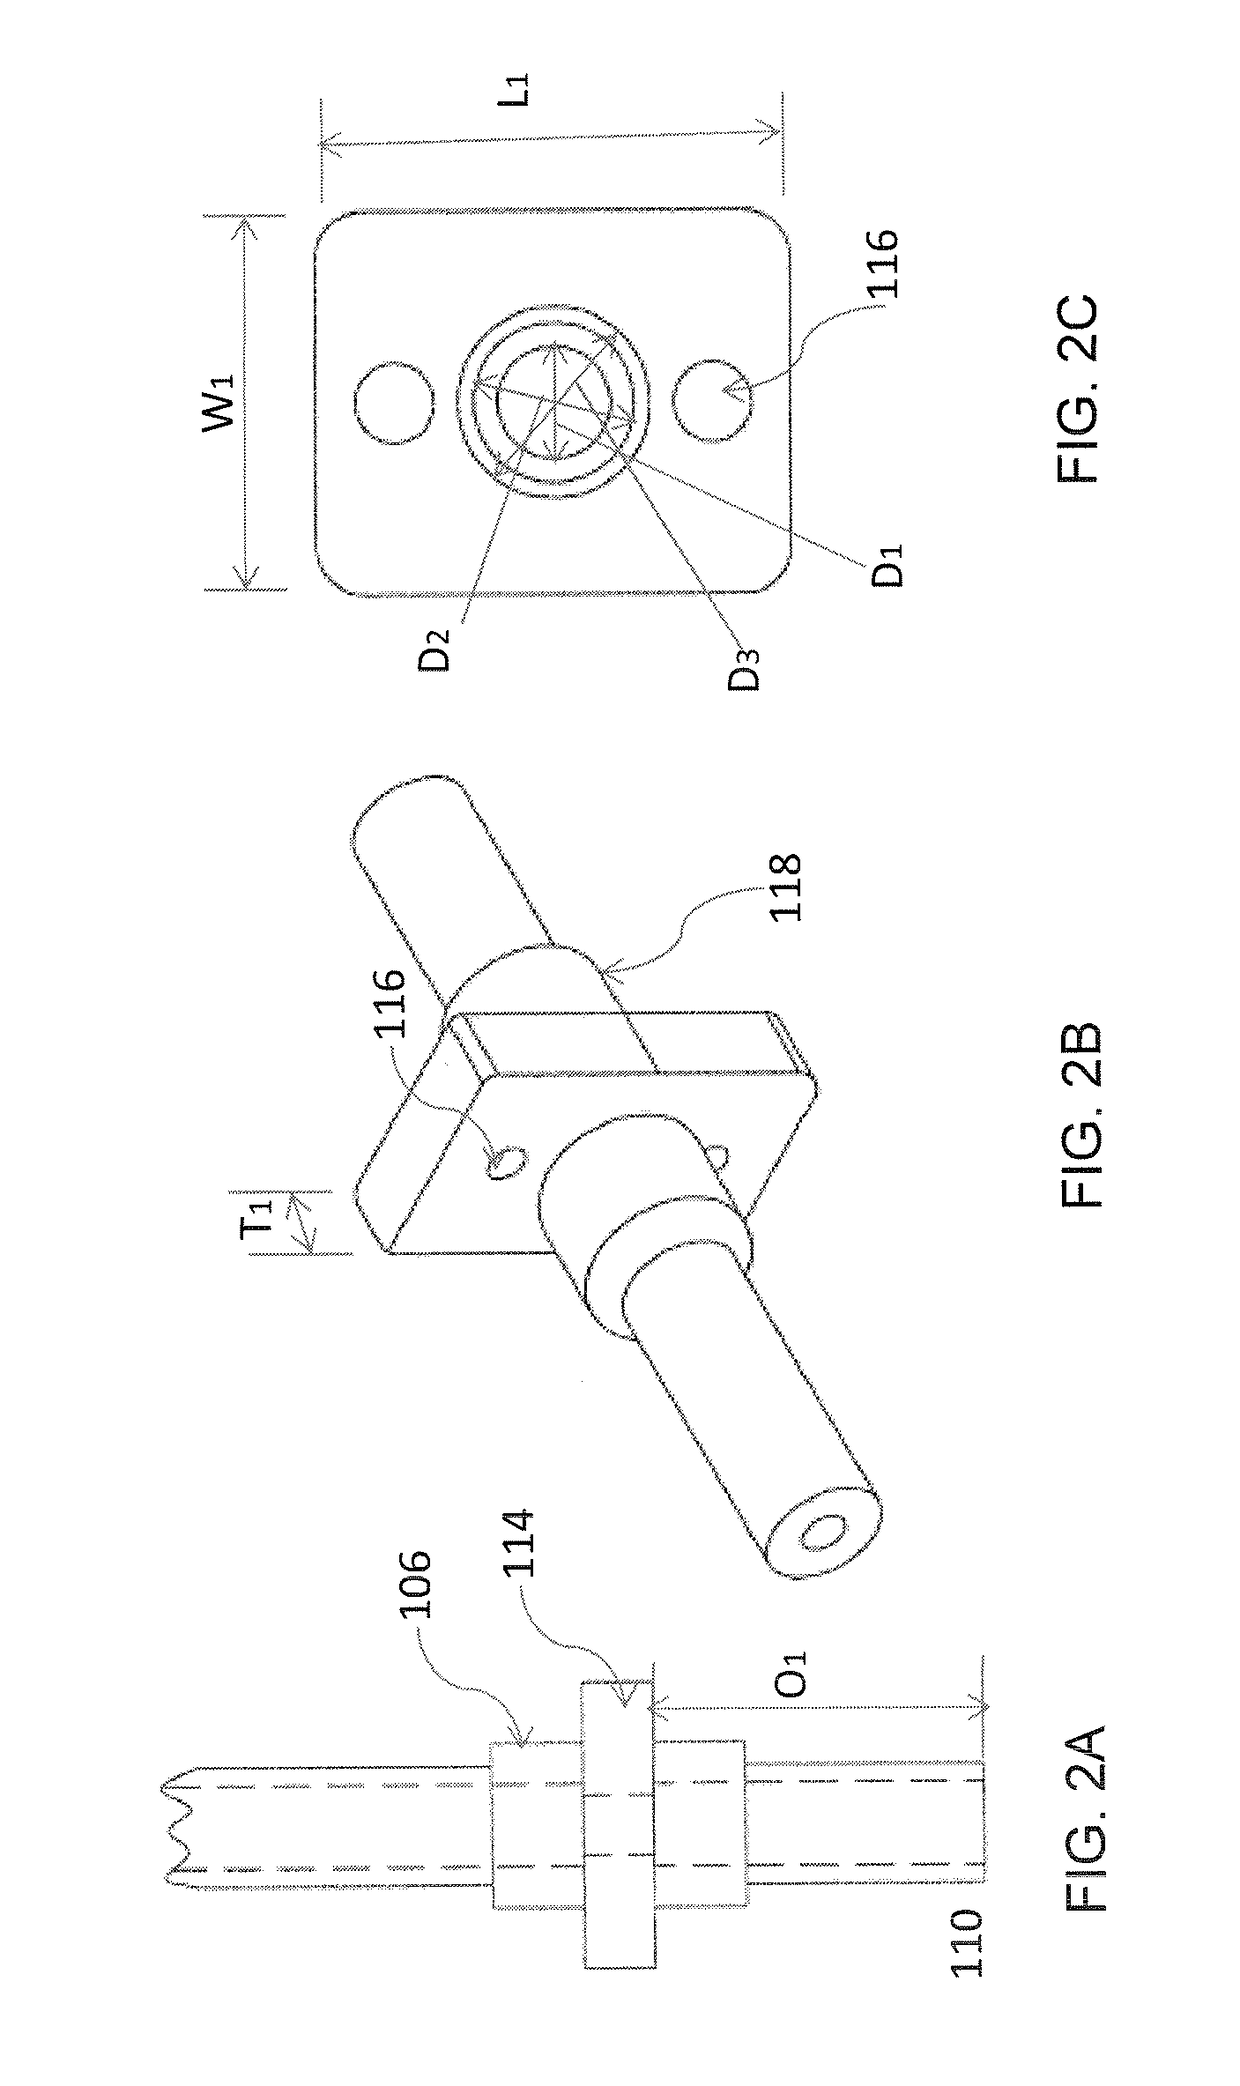 Implant device for use in salivary gland duct